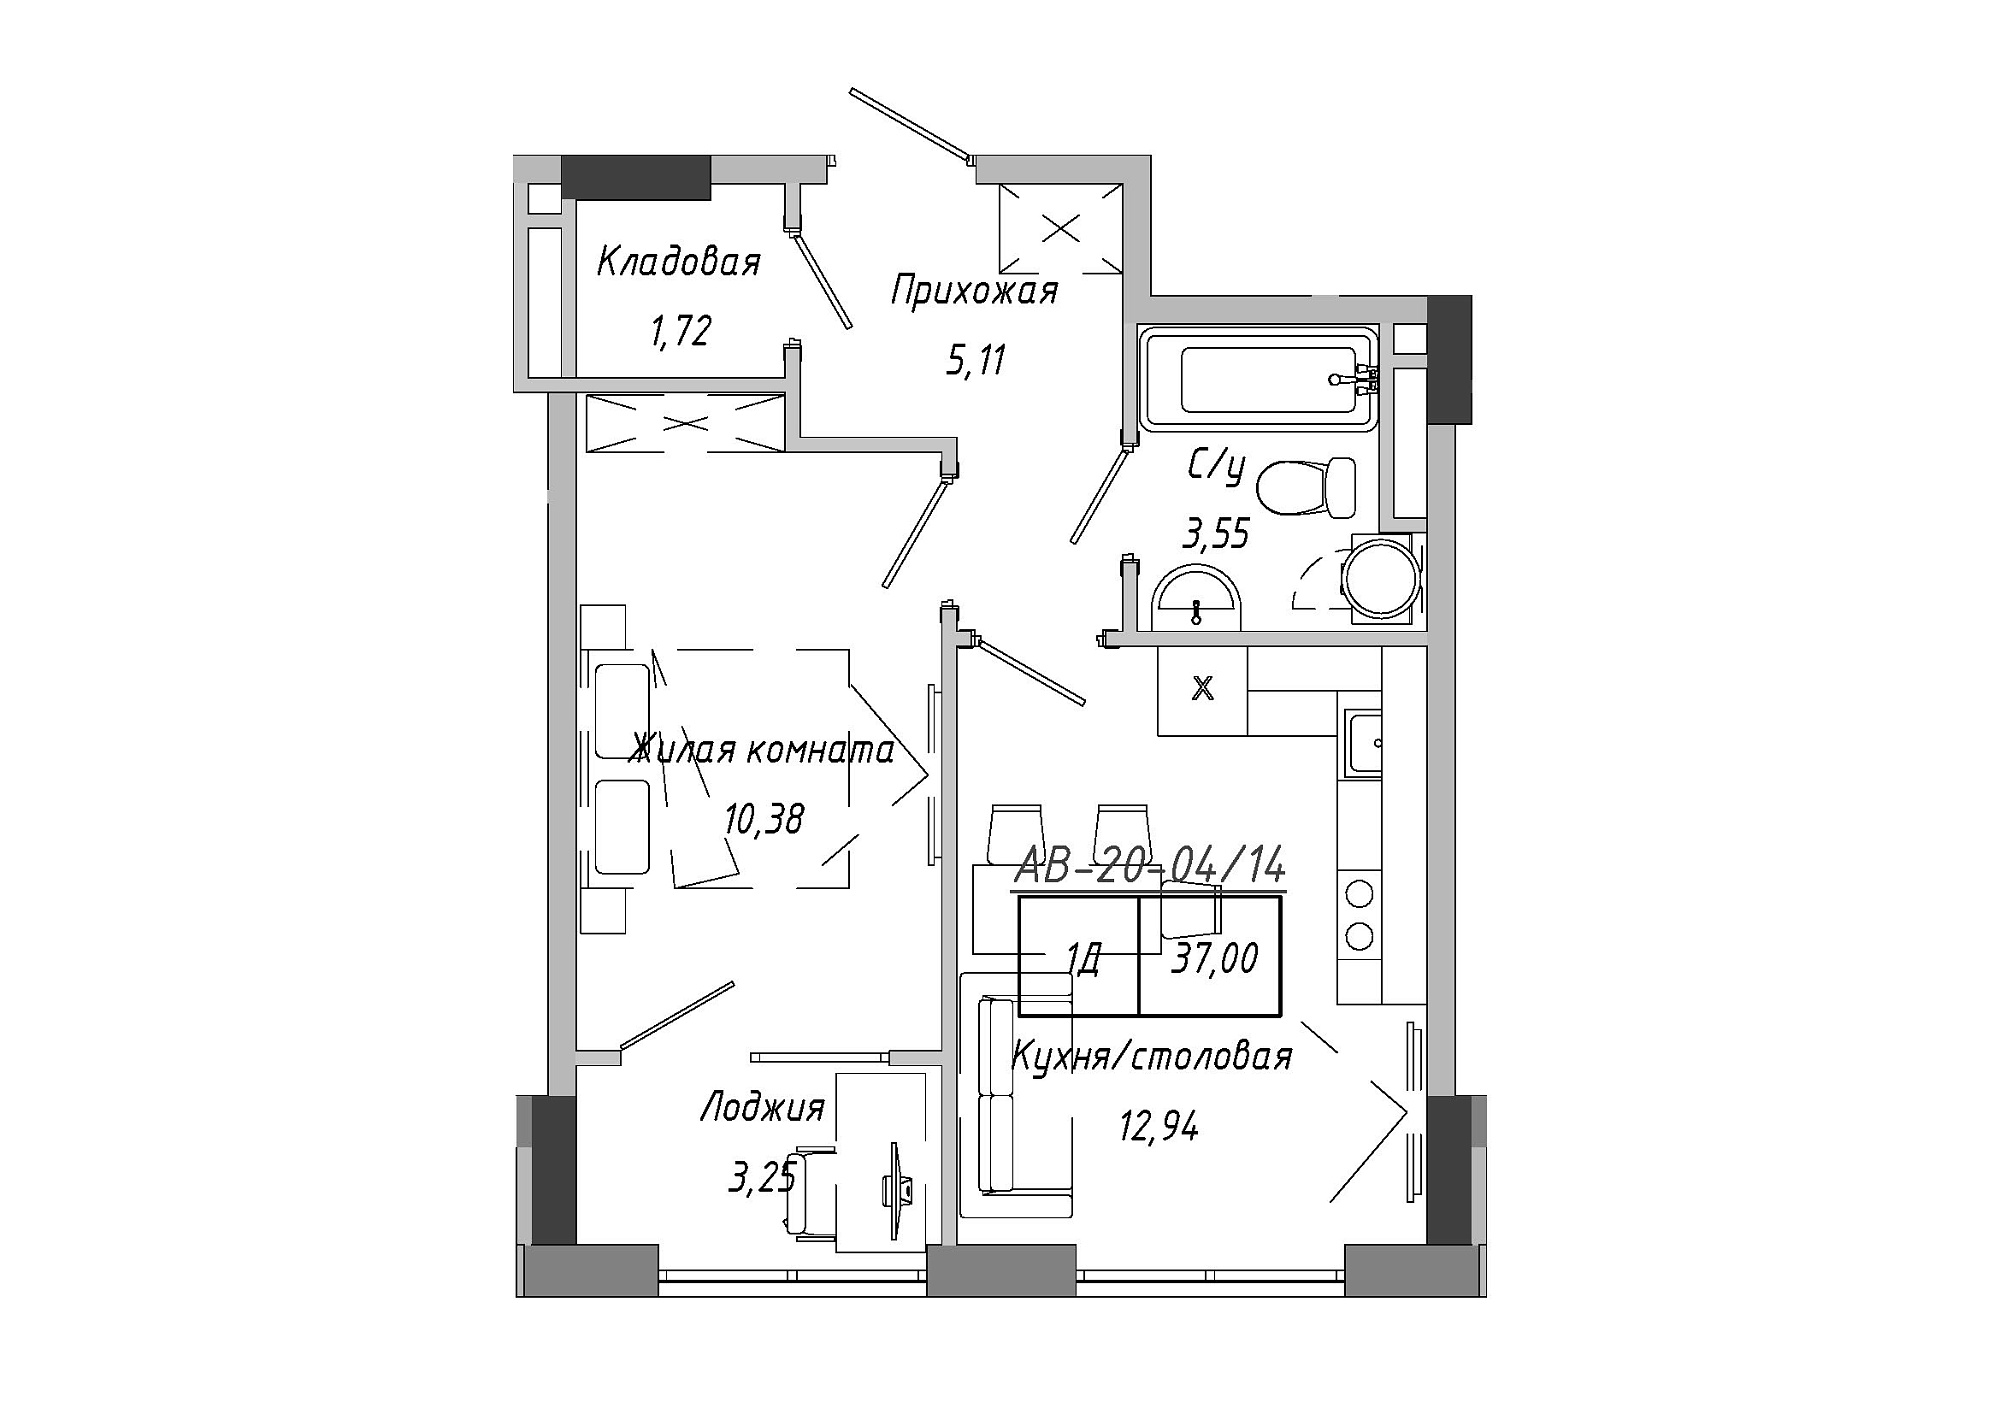 Planning 1-rm flats area 37m2, AB-20-04/00014.